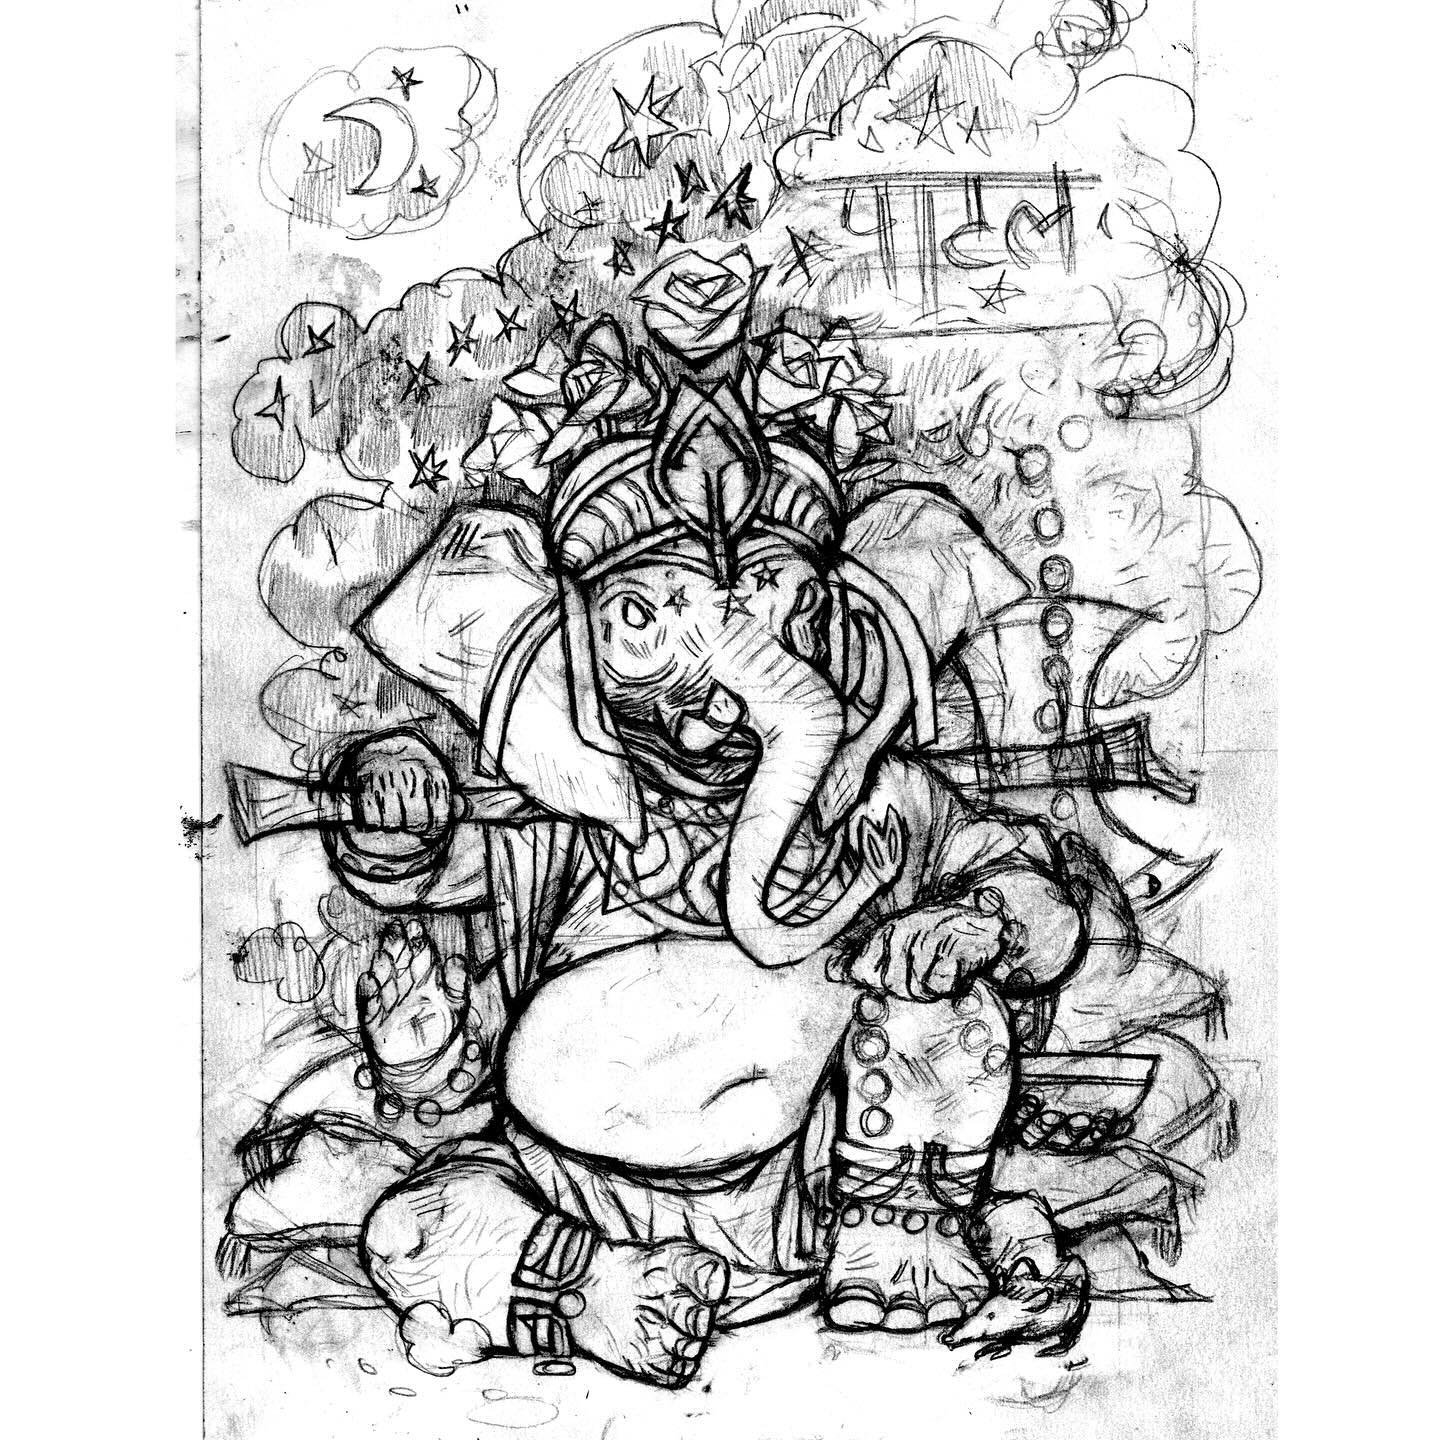 Found a drawing of Ganesh while going through old sketchbooks. 

For comics &amp; more join my NEWSLETTER at the link in bio. 
#Ganesh #comics #comicbooks #cartoonist #pencildrawing #ganesha